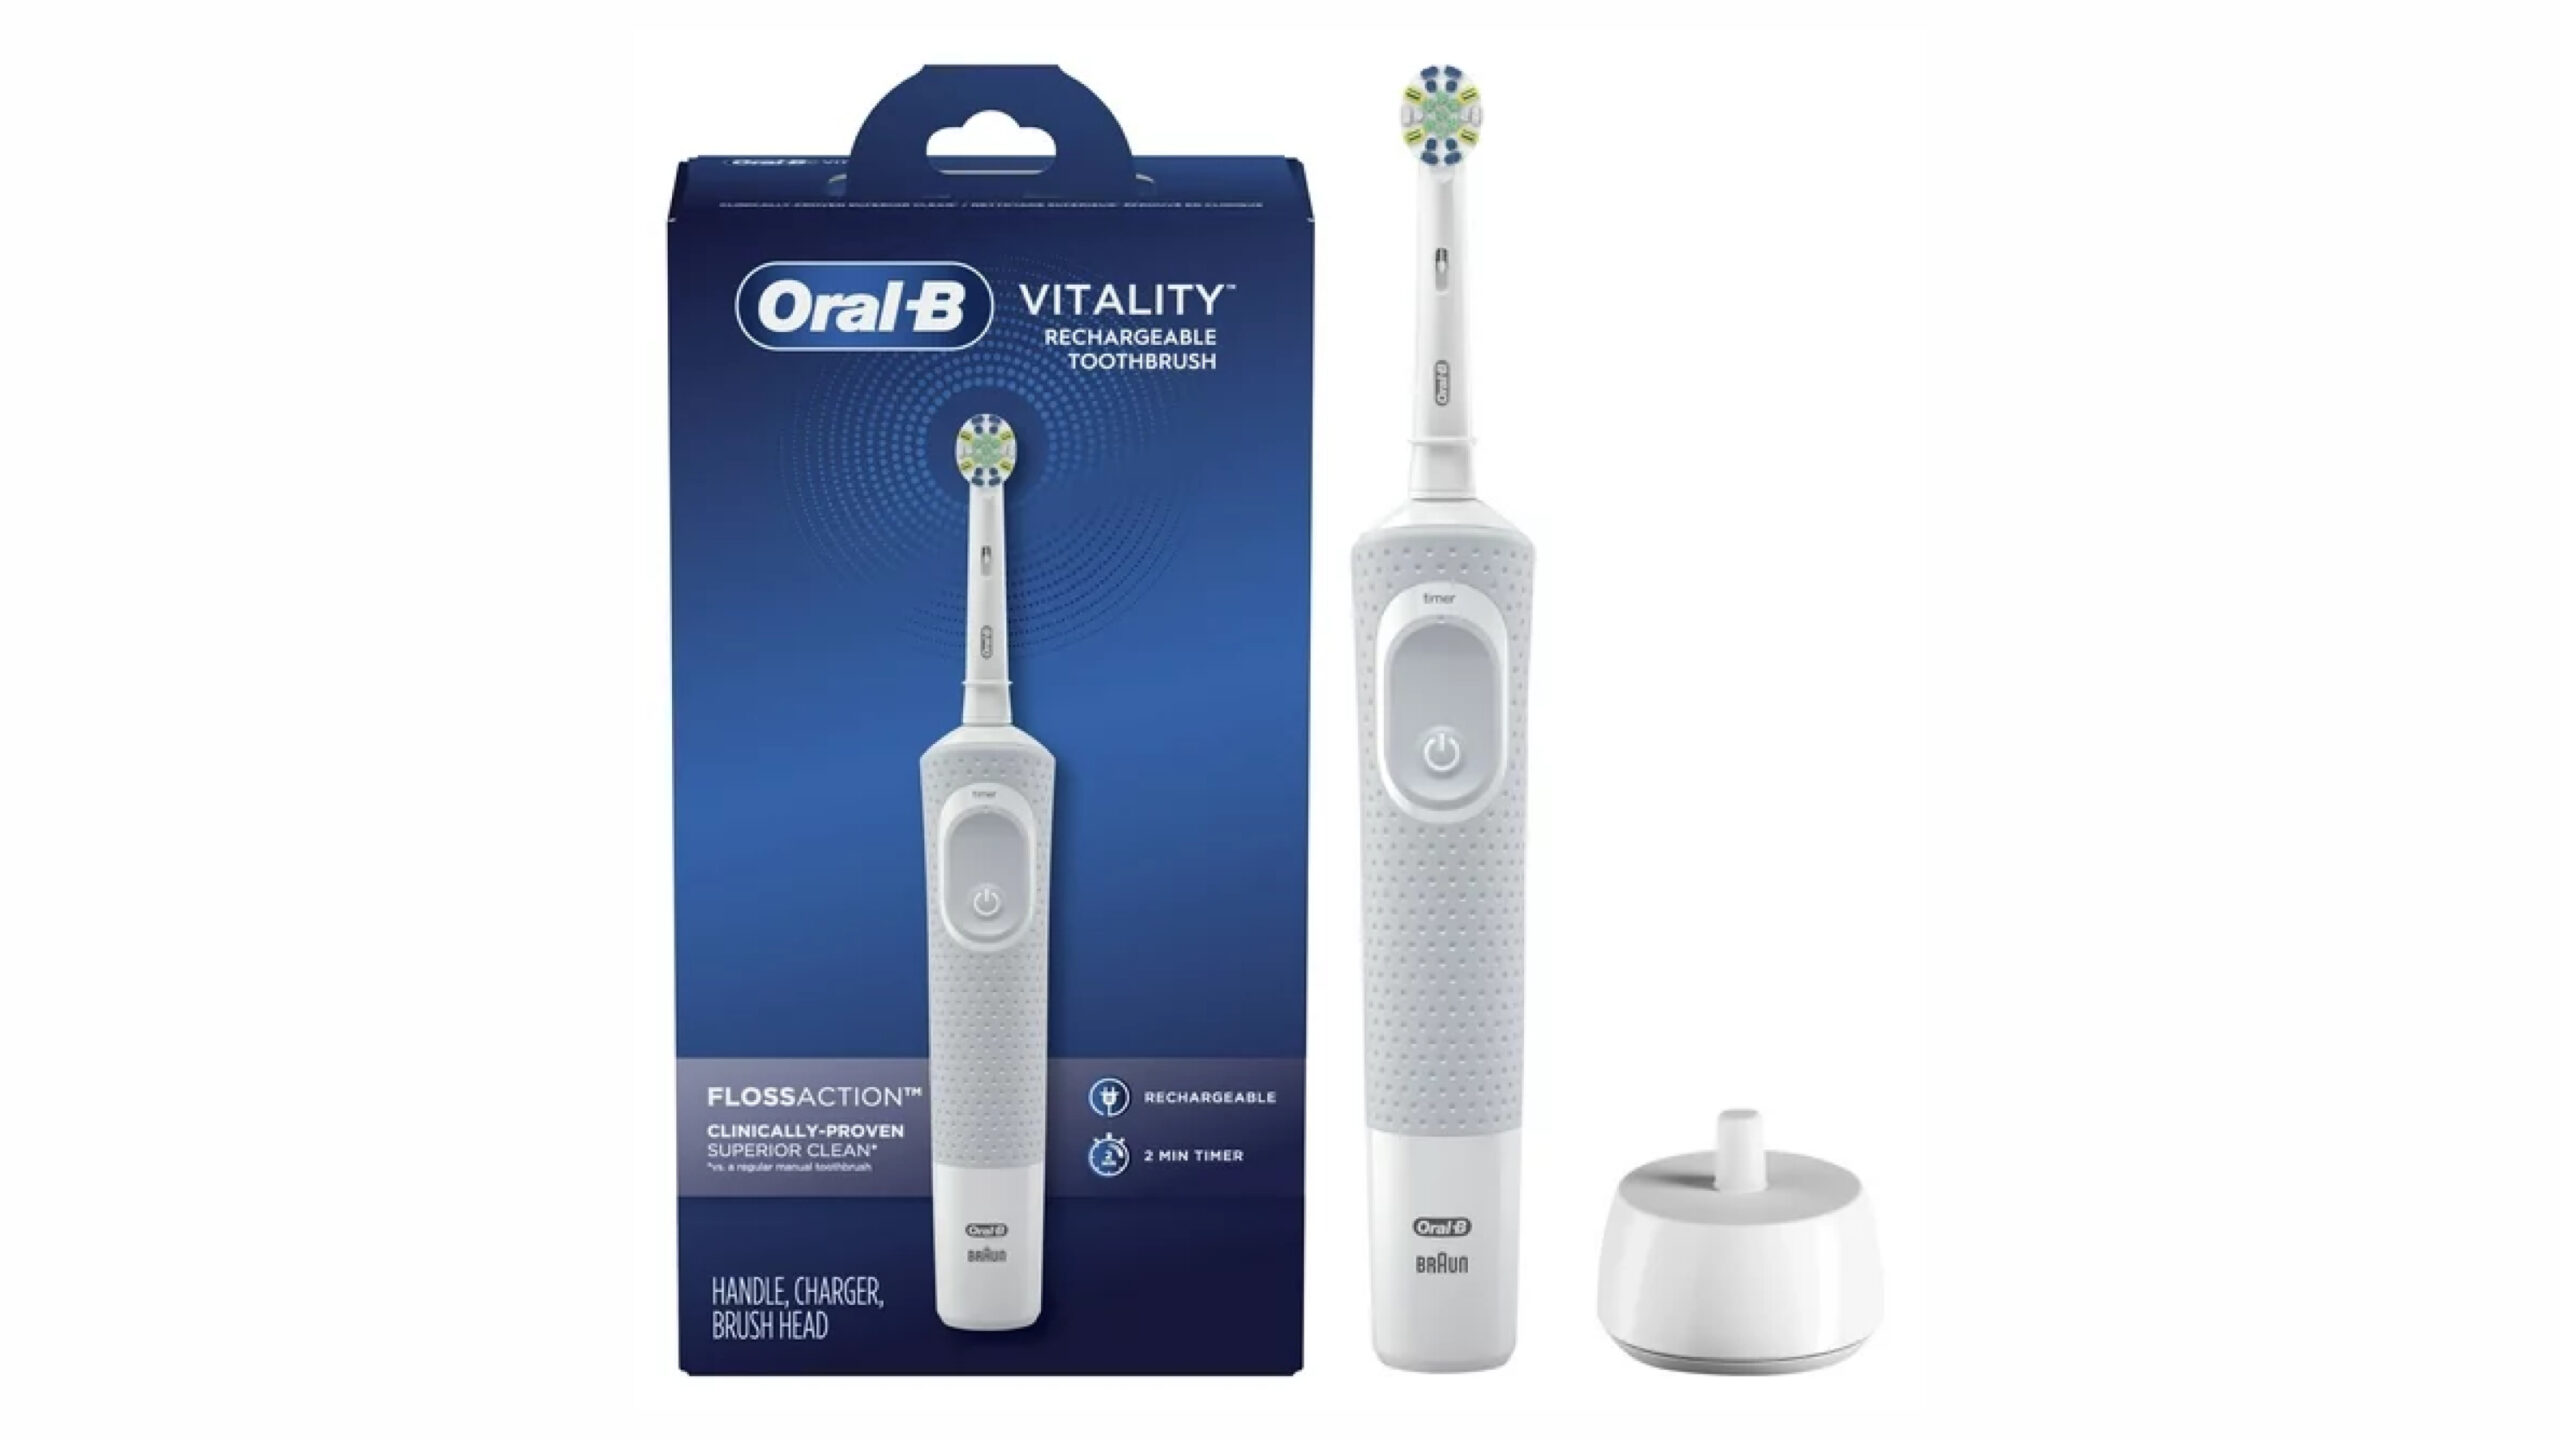 packet and display of oral-b vitality flossaction electric rechargeable toothbrush